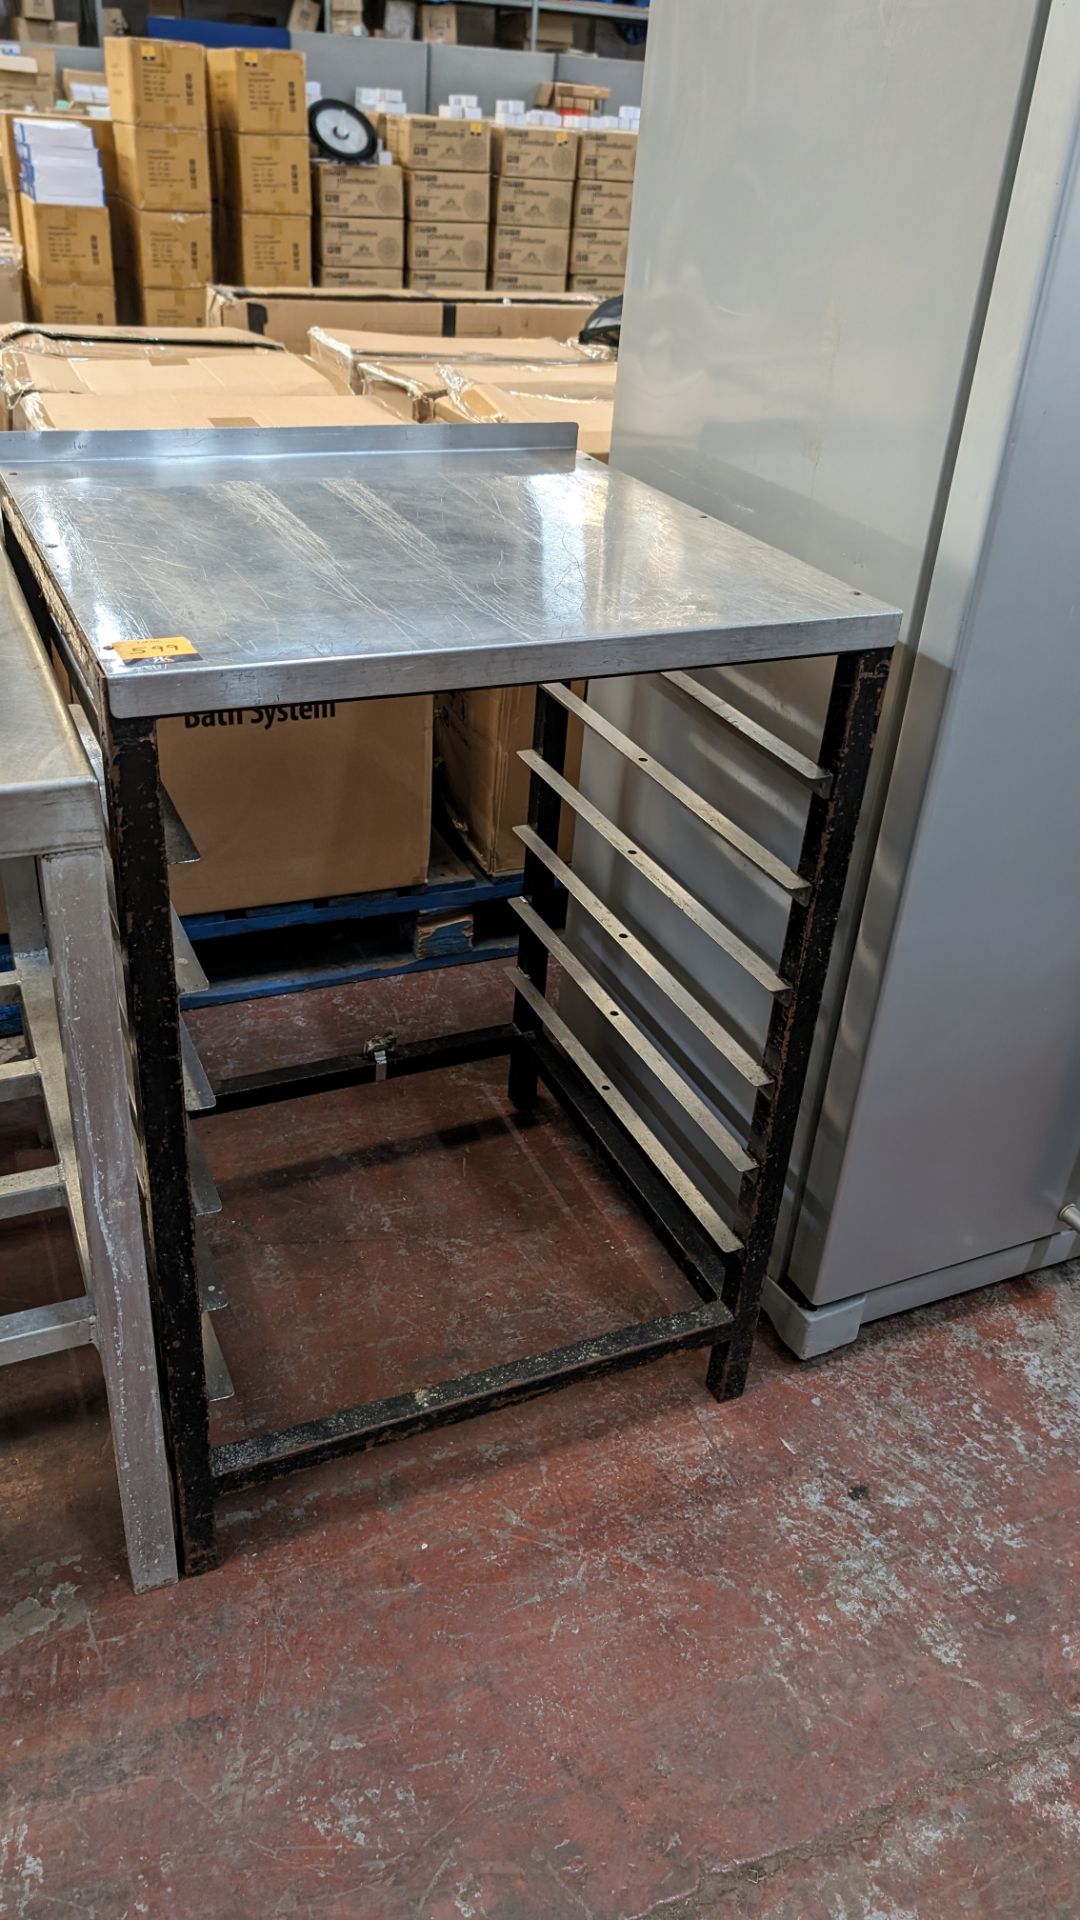 Stainless steel table with capacity for holding trays below, assumed to be for use for commercial di - Image 2 of 4